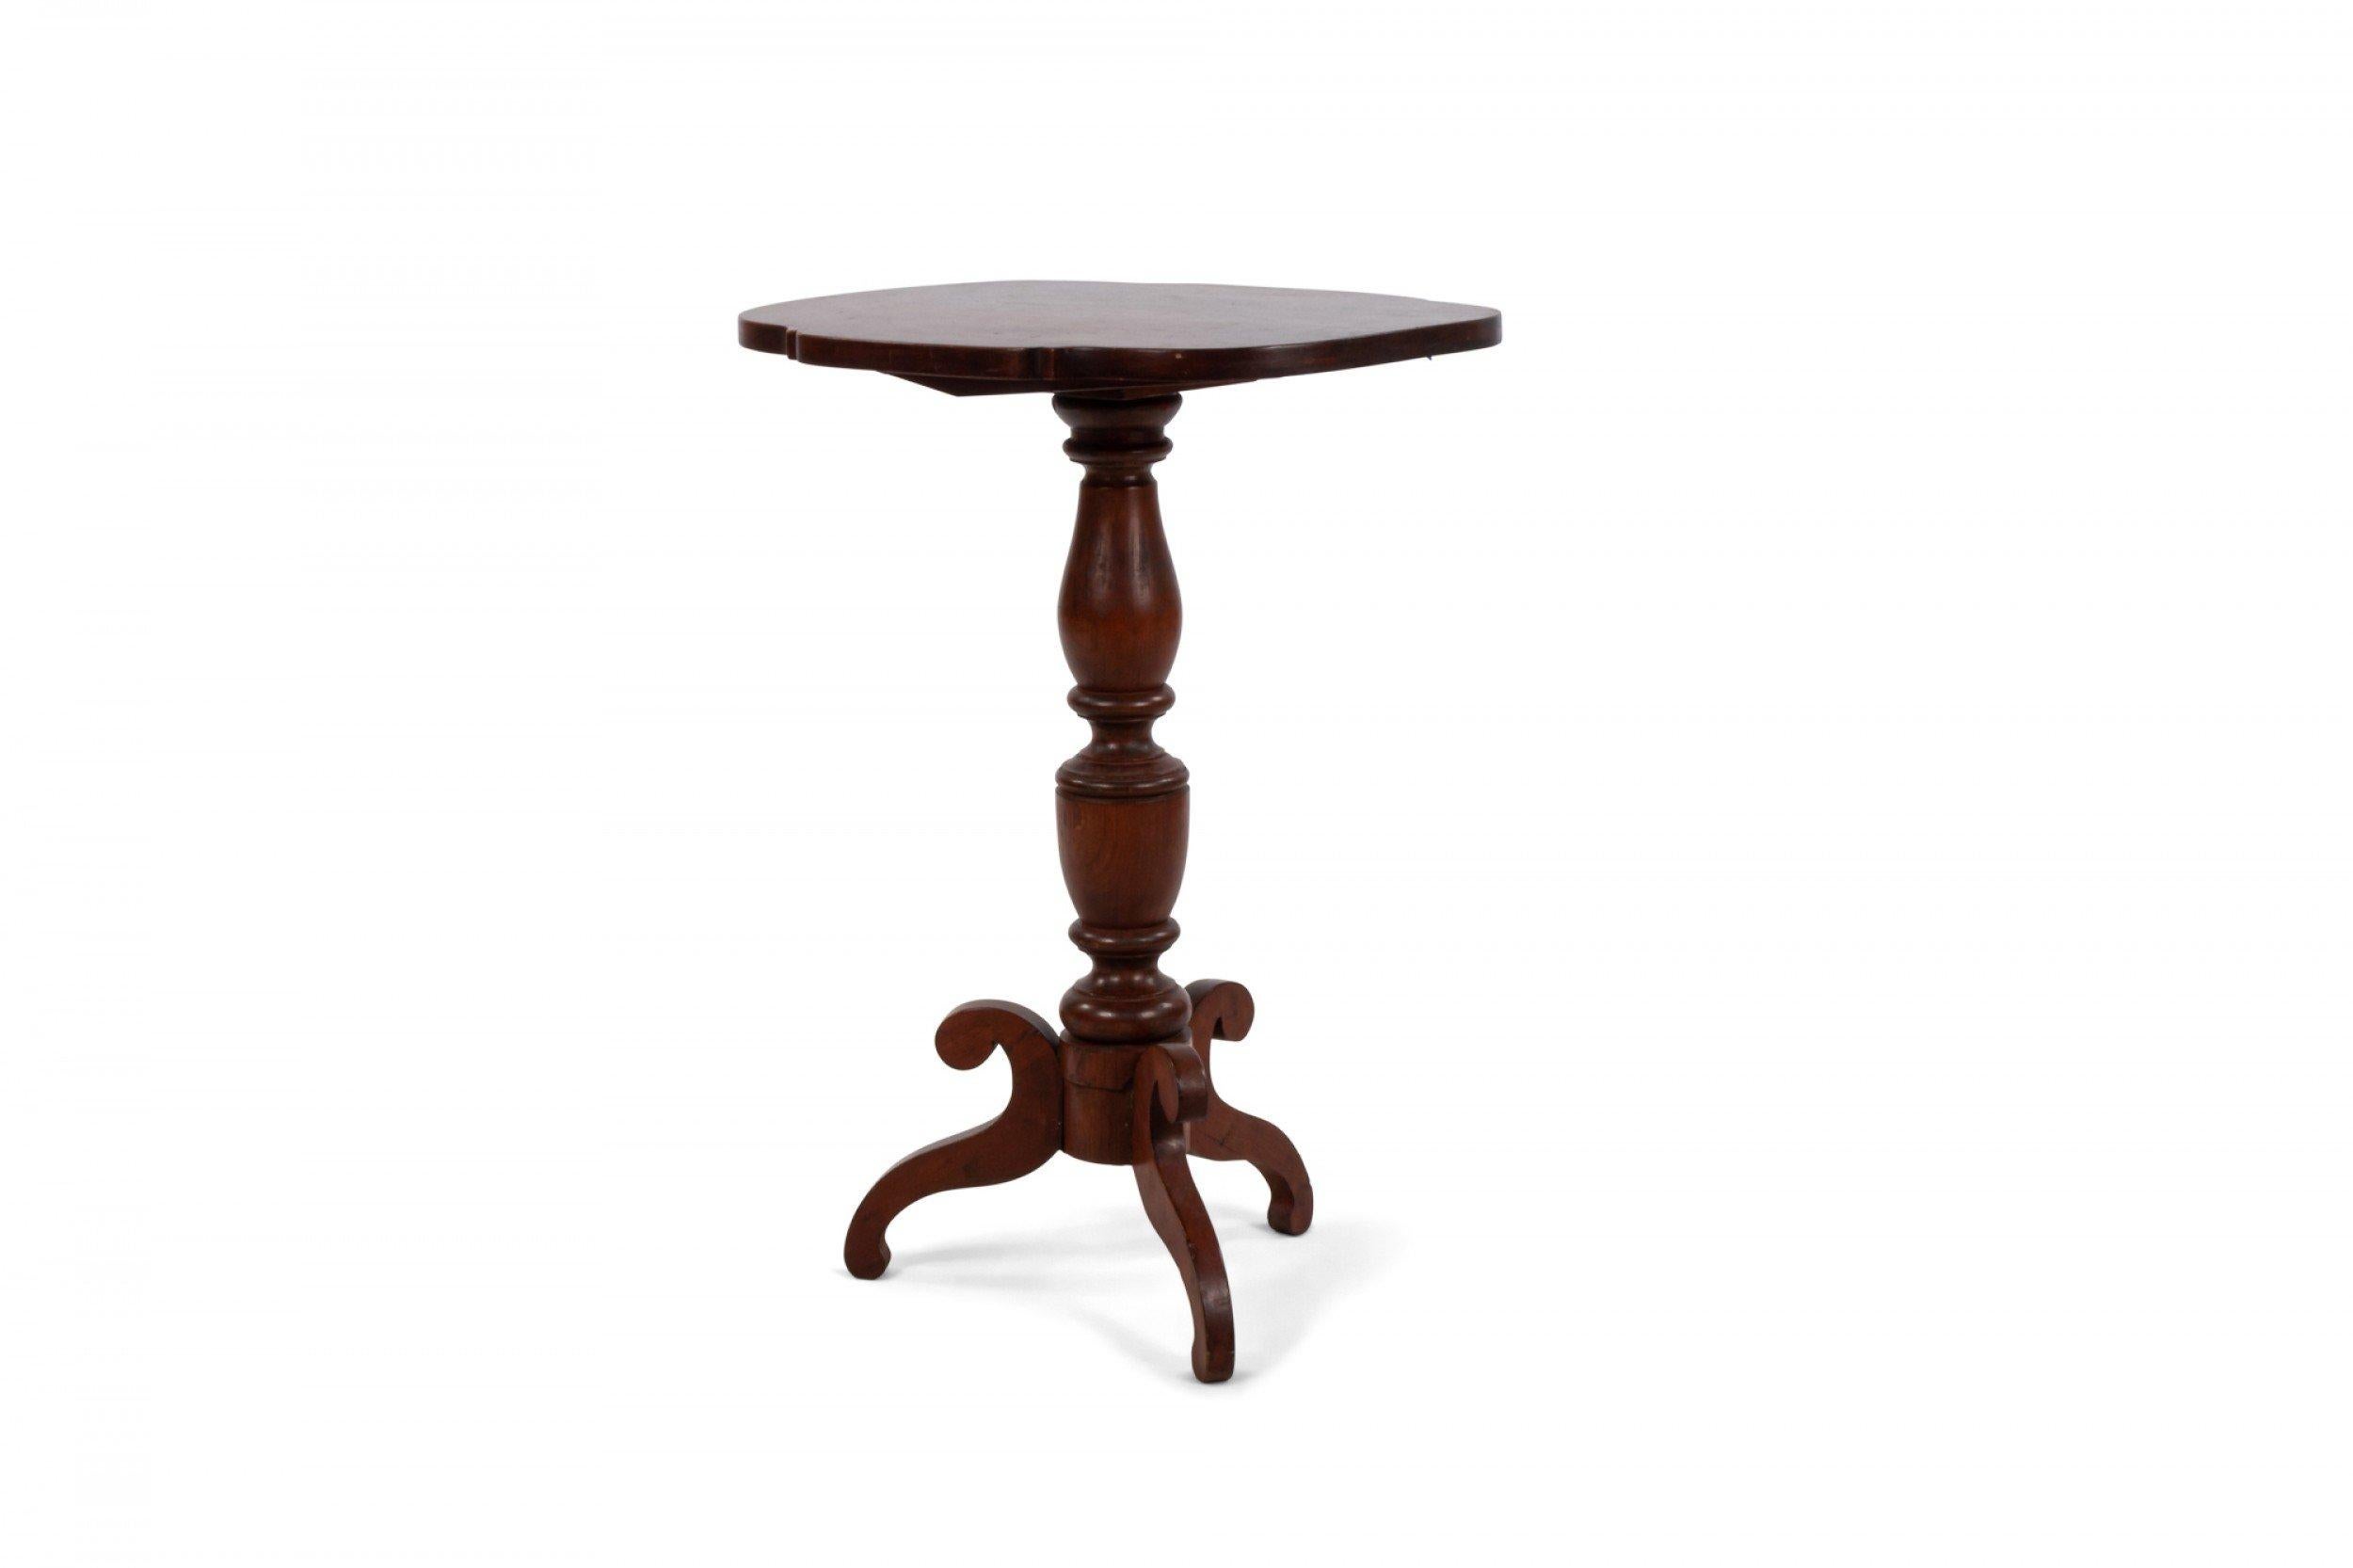 20th Century American Federal Mahogany Tilt-Top Scalloped Table For Sale